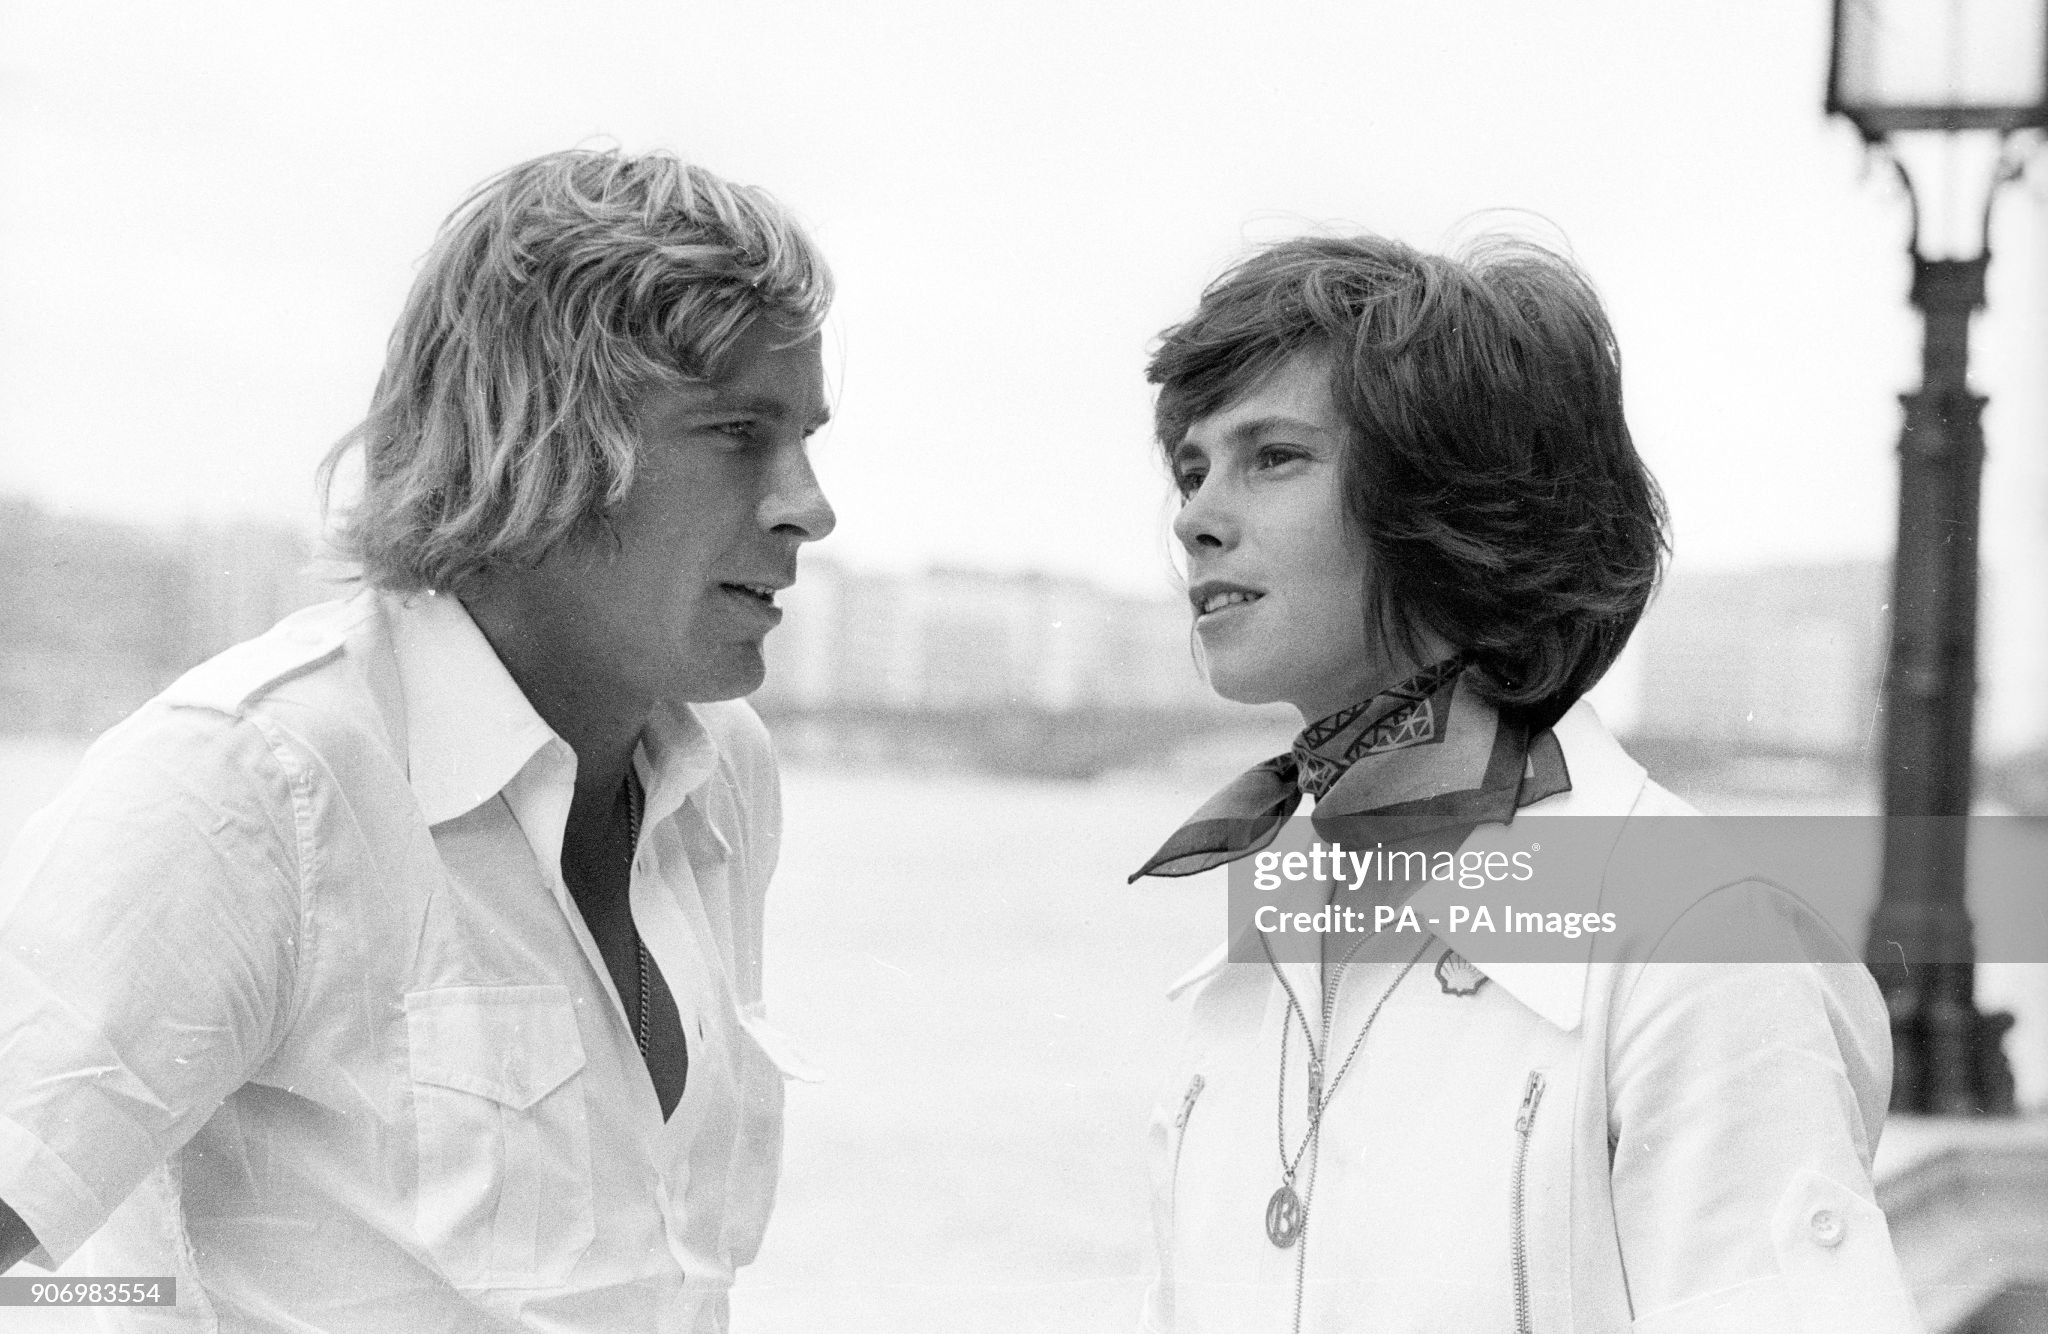 James Hunt and Davina Galica before the ‘House of Commons Motoring Club’ reception with Margaret Thatcher on 13 July 1976. 